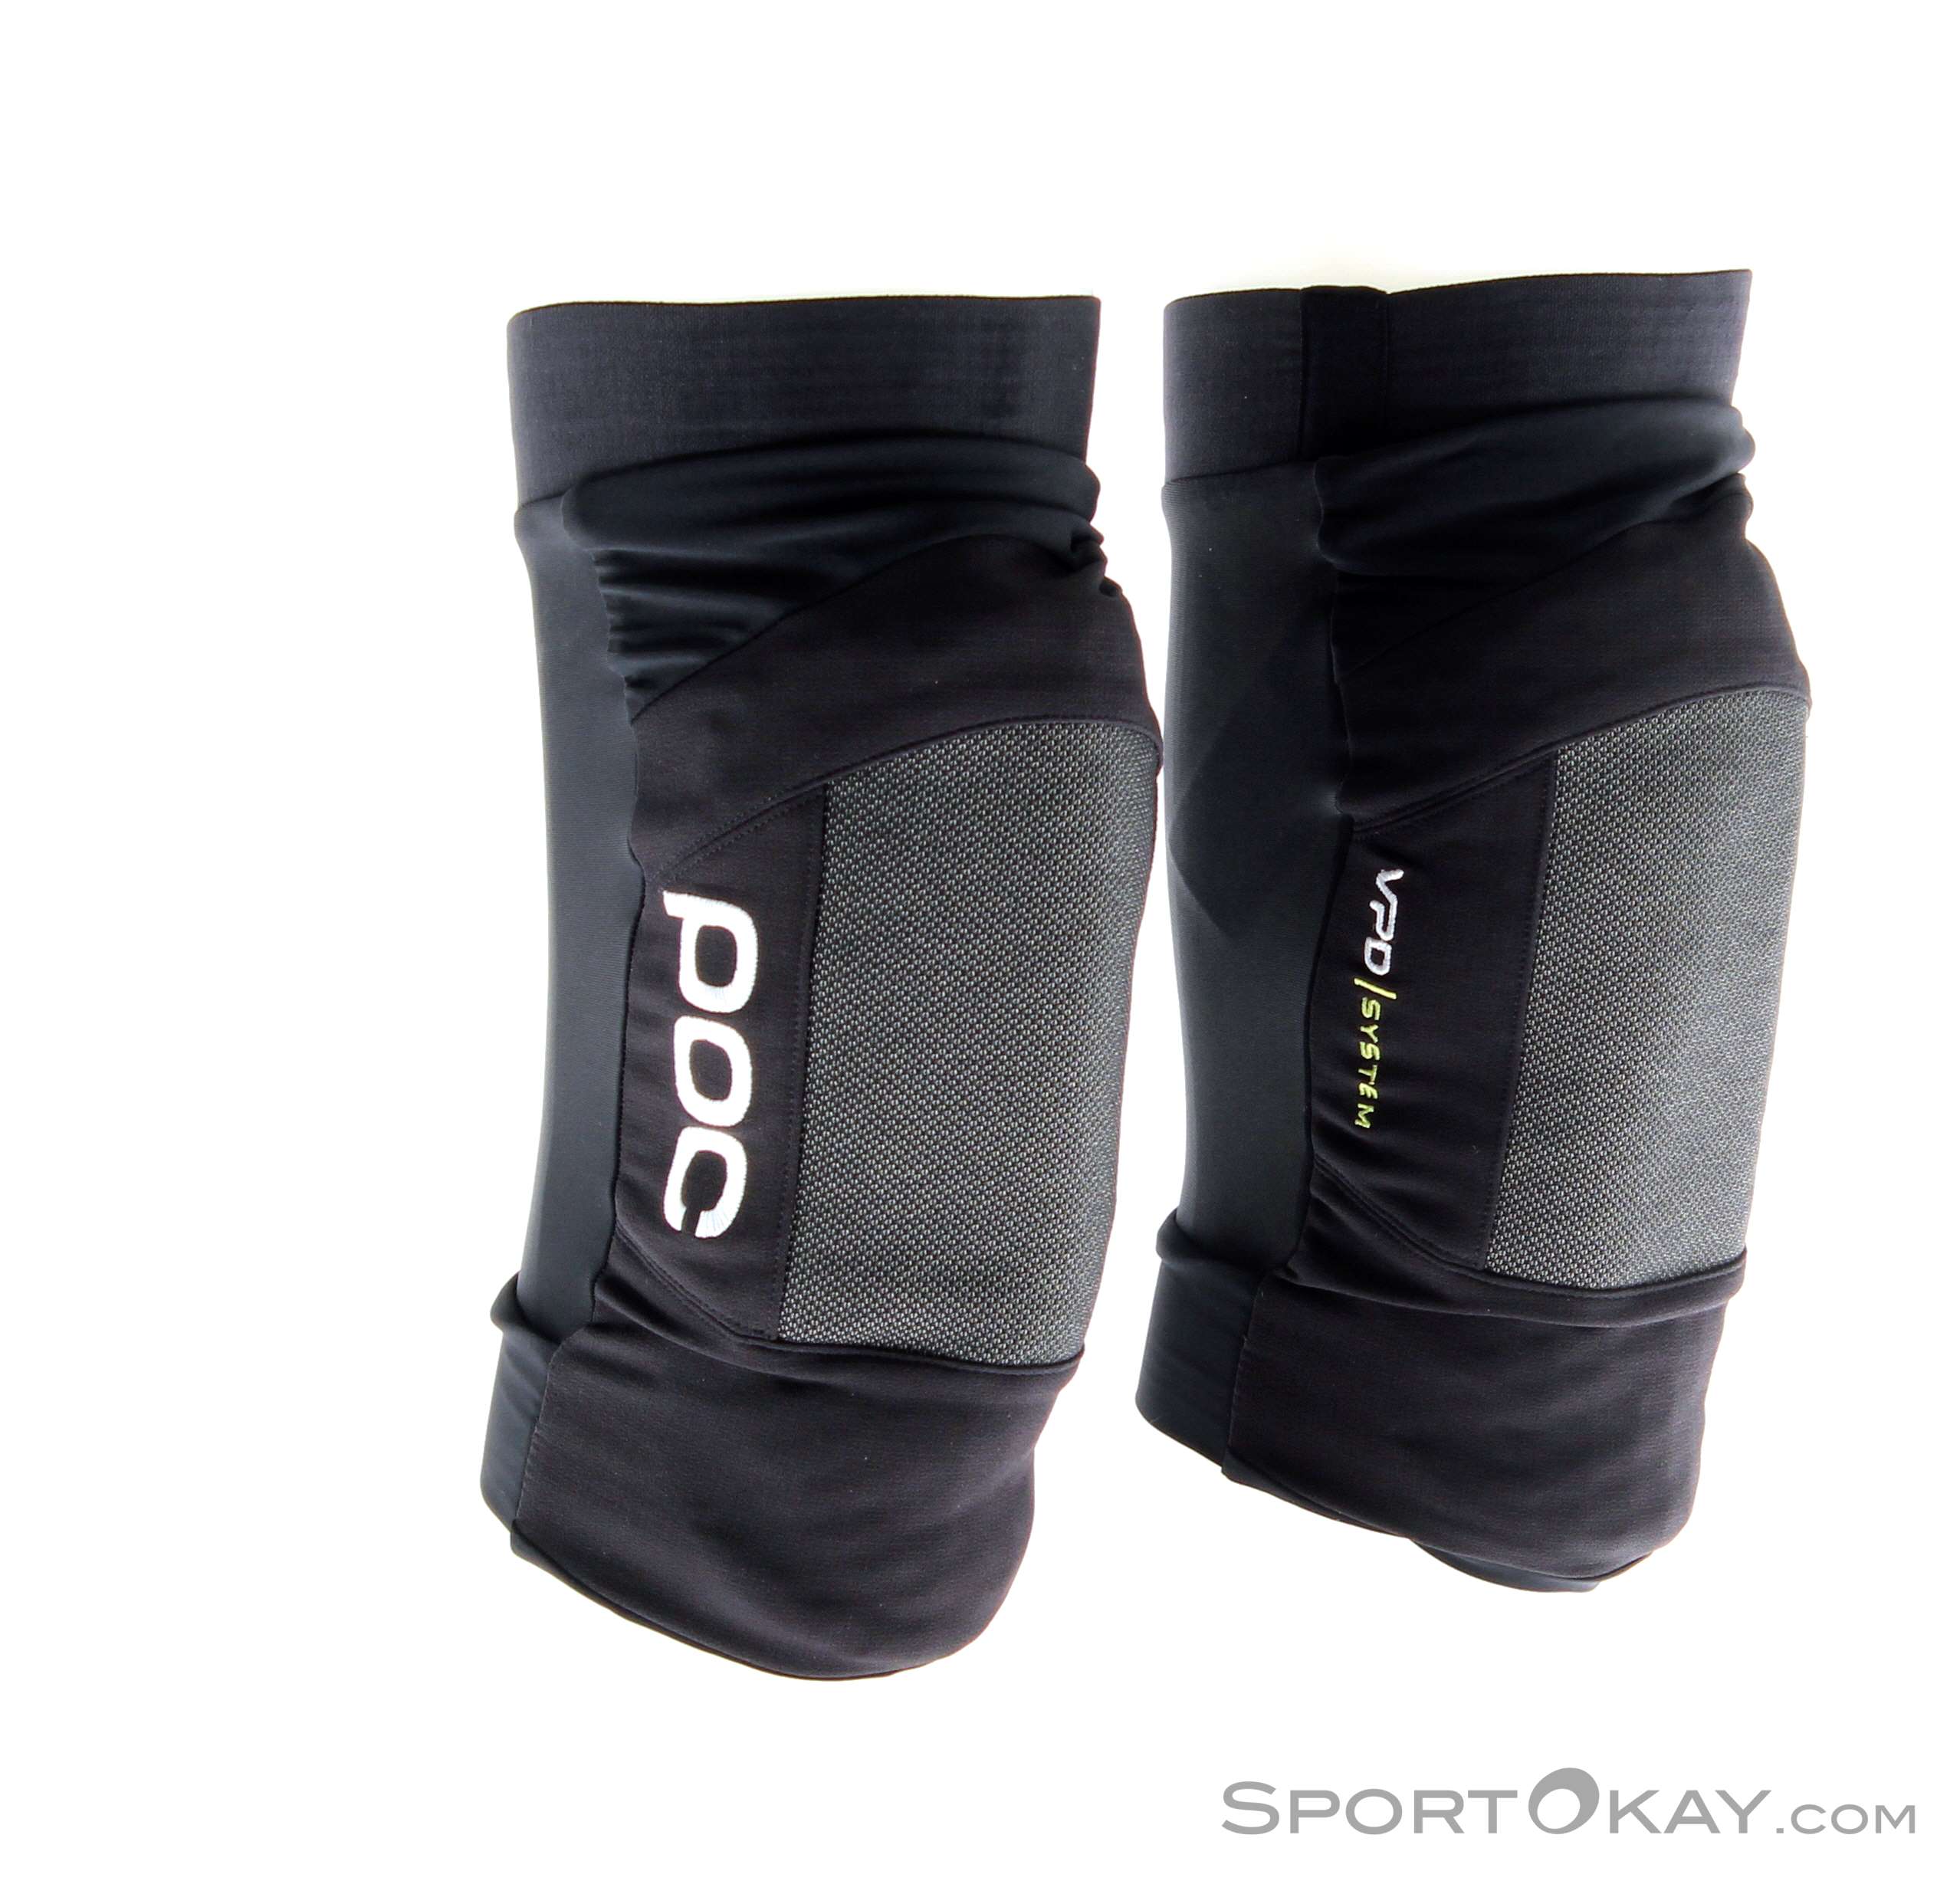 POC Joint VDP 2.0 System Knee Guards - Knee & Shin Guards - Protectors